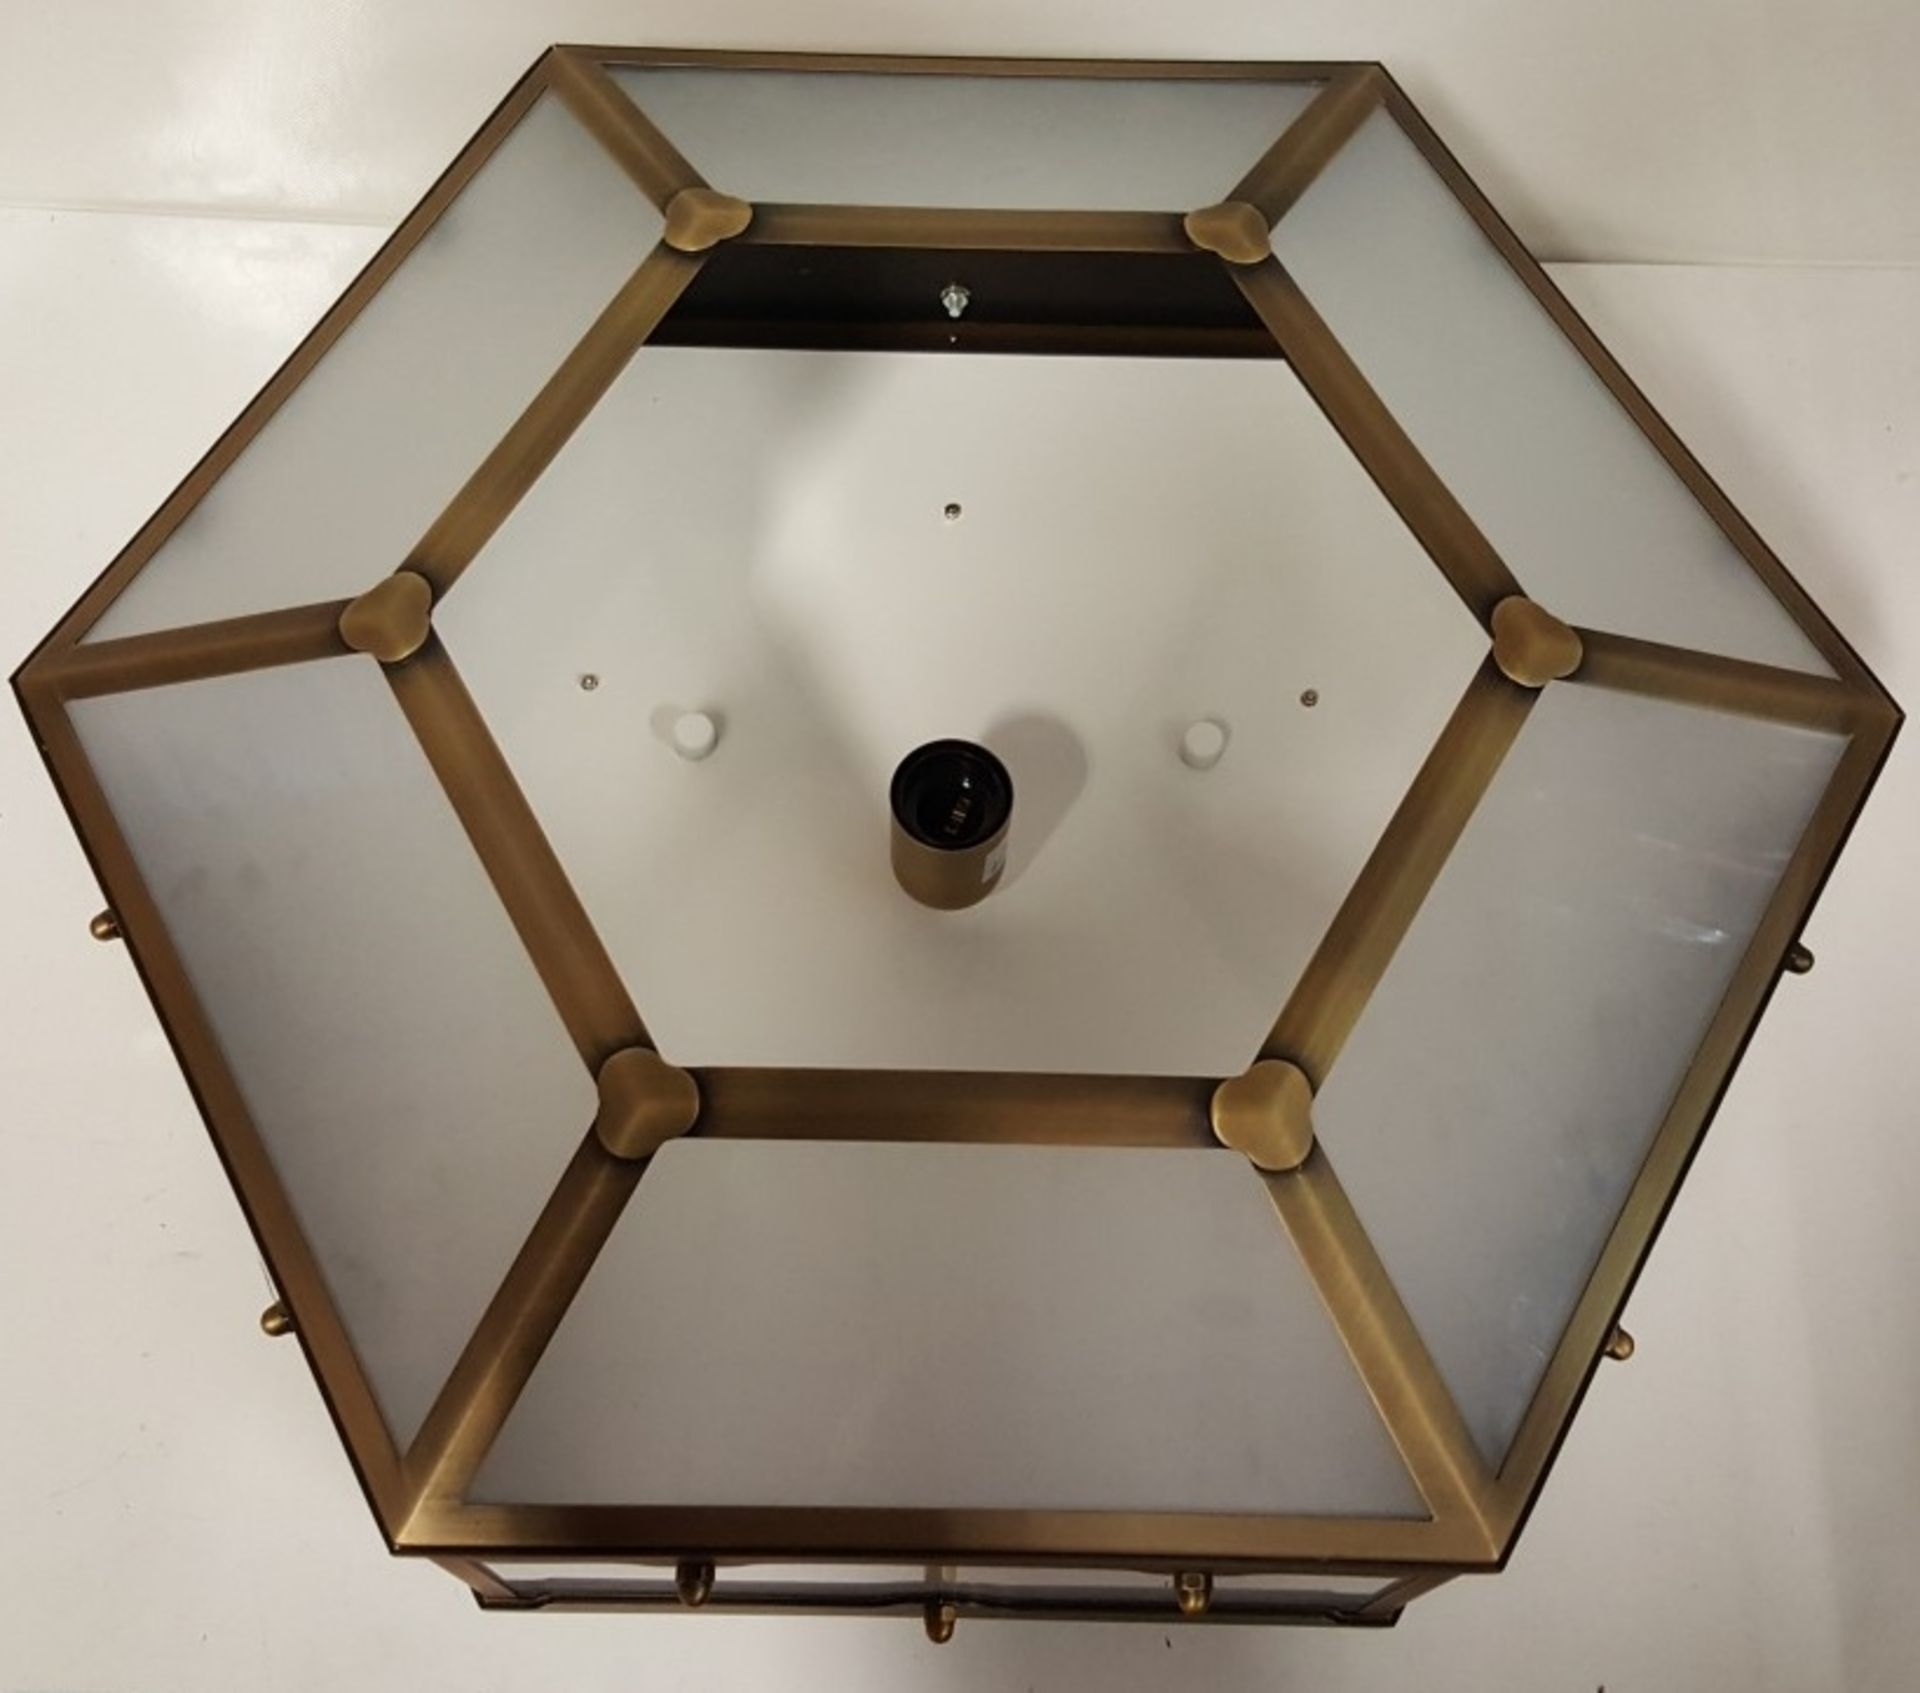 1 x Chelsom Flush Fitting Hexagonal Shaped Light Fitting In A Antique Brass Finish - REF:J2376 - Image 6 of 7